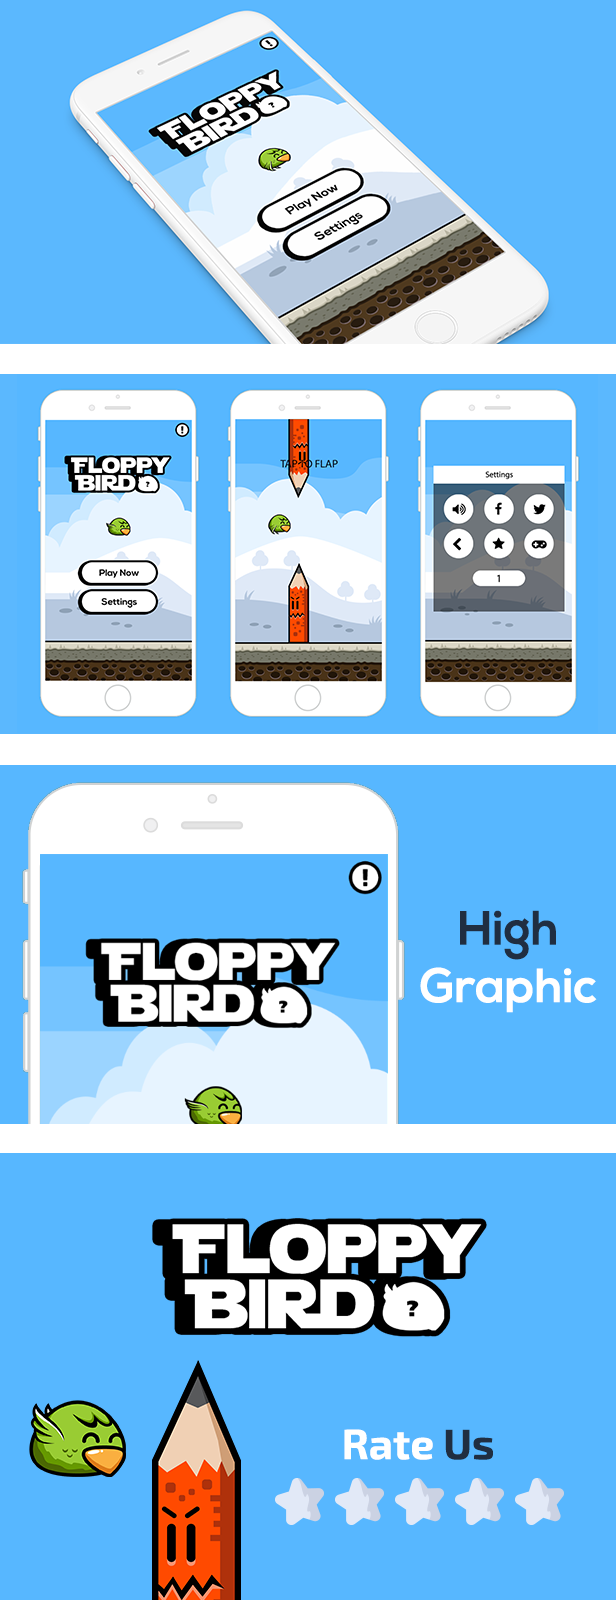 FLOPPY BIRD WITH ADMOB - ANDROID STUDIO & ECLIPSE FILE - 2